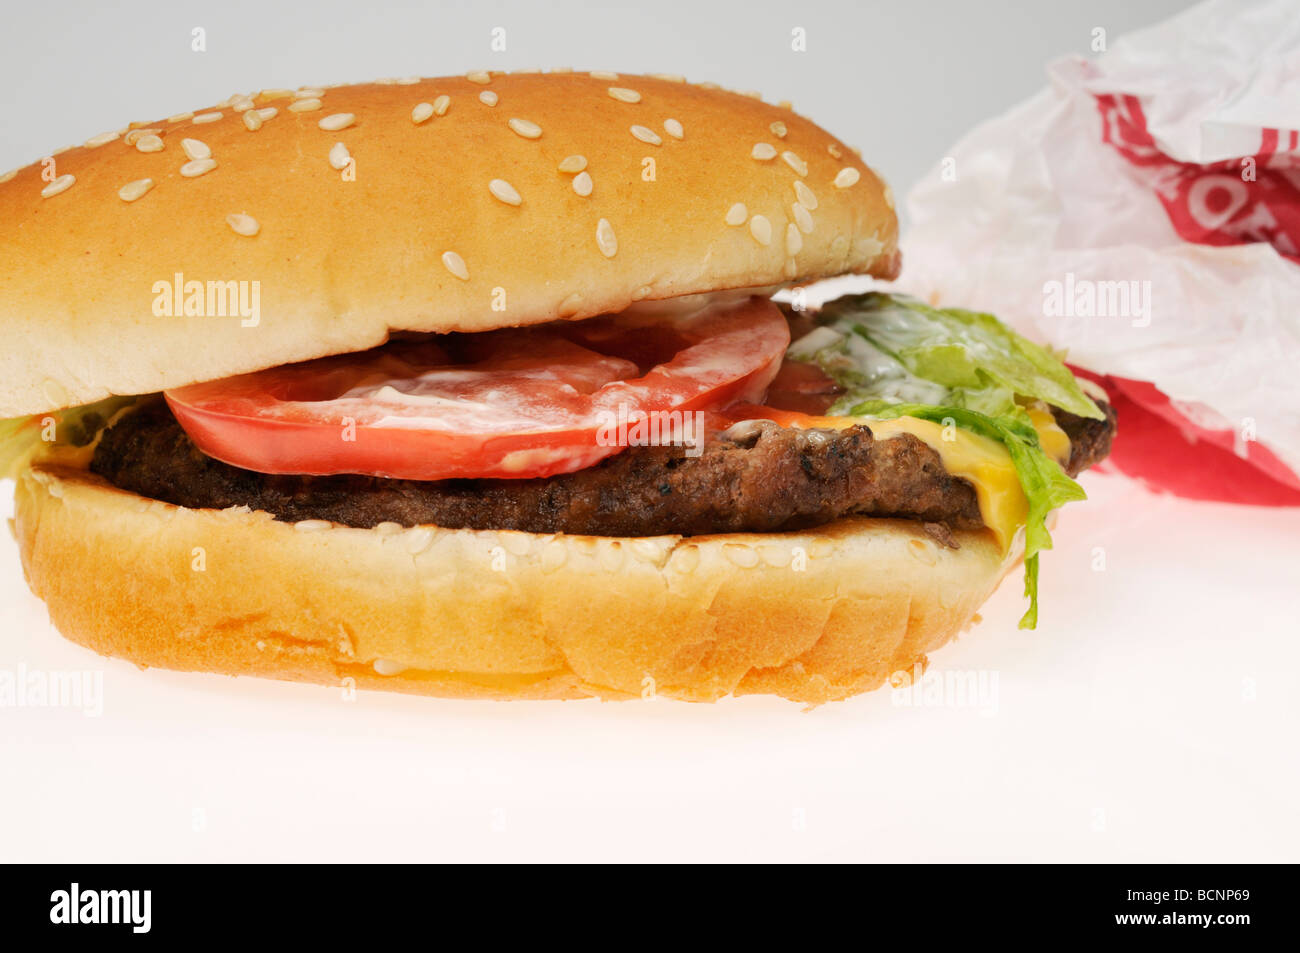 Close up of Burger King Whopper sandwich with discarded wrapper on white background Stock Photo